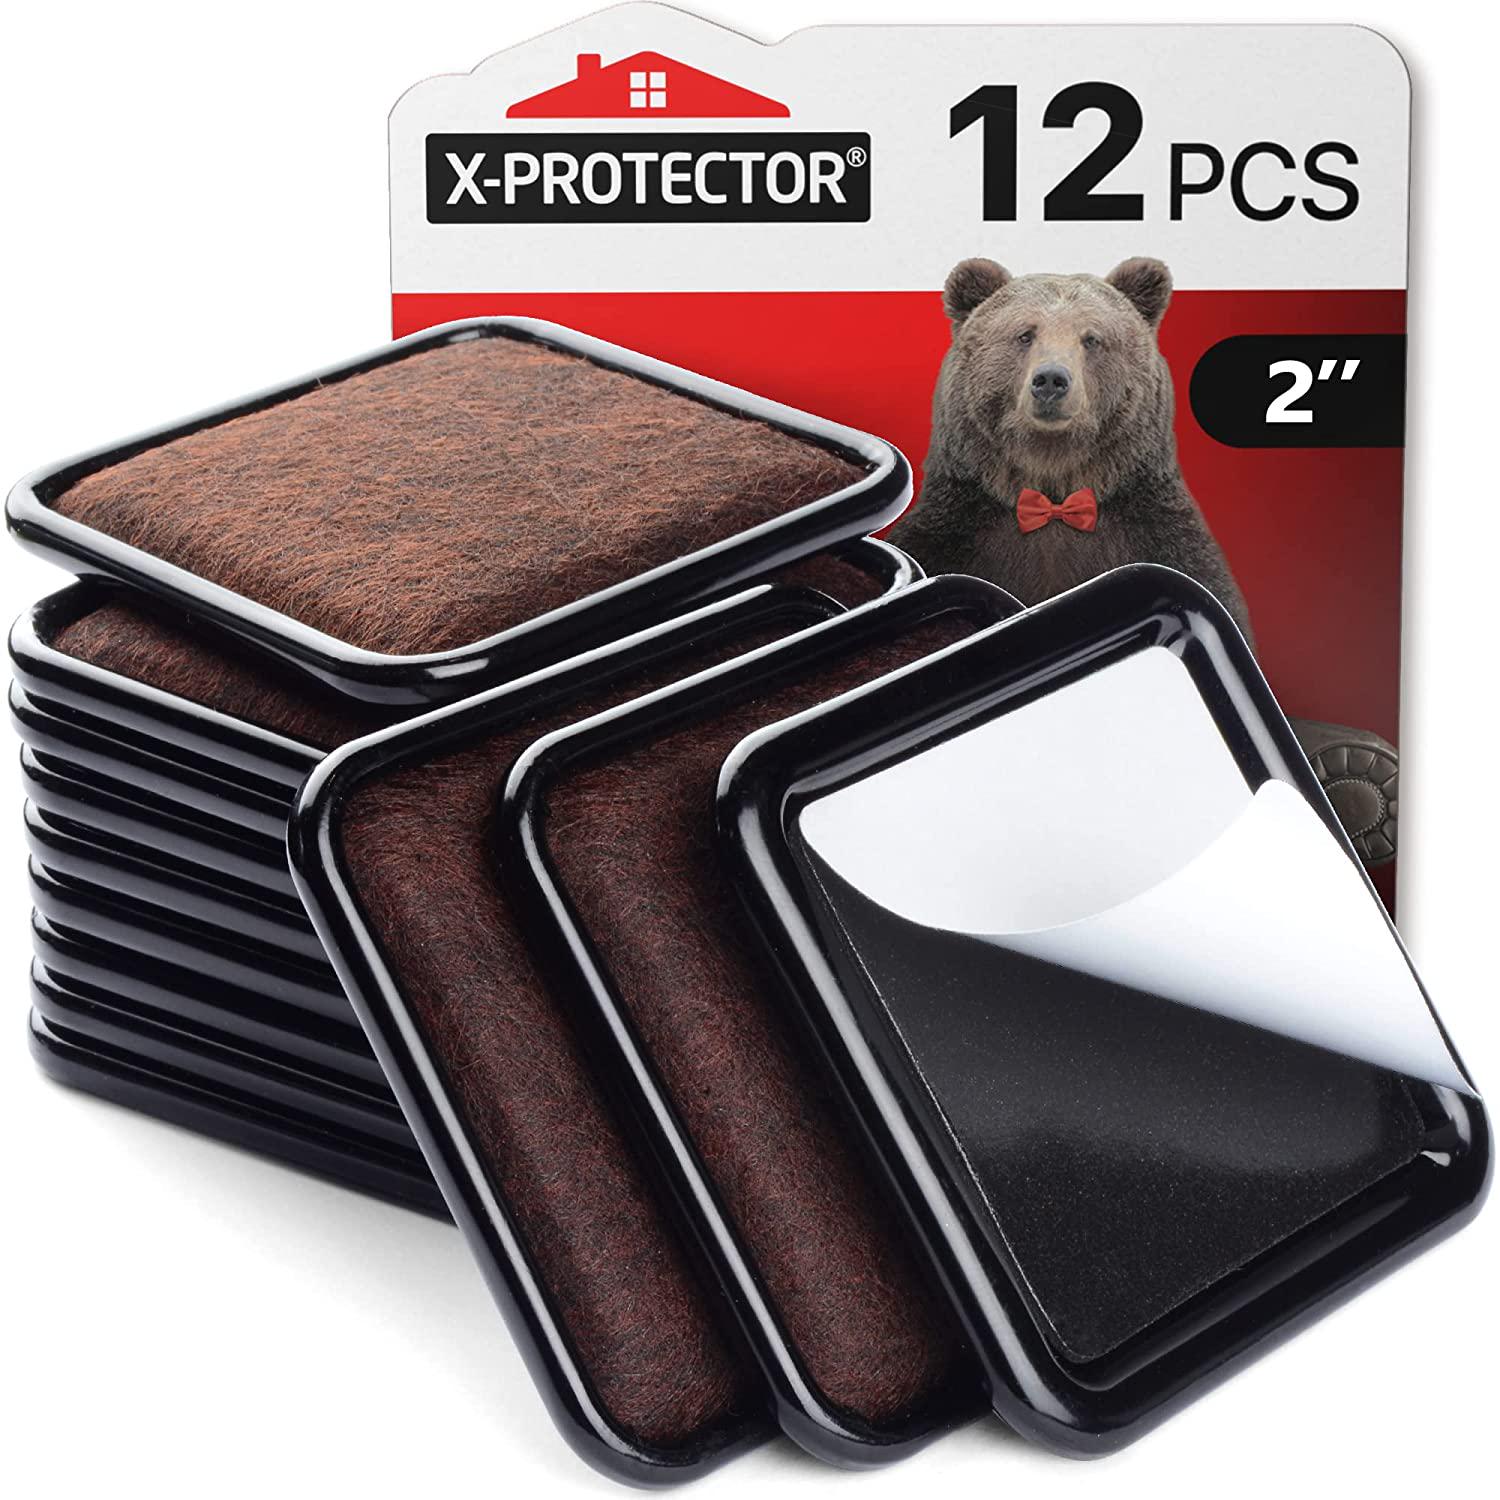 X-Protector, Furniture Sliders for Hardwood Floors X-Protector 12 PCS 2 Furniture Floor Protectors Premium Furniture Casters Table Feet Pads Carpeted Pads Under Furniture Moving Furniture Pads Sliders!